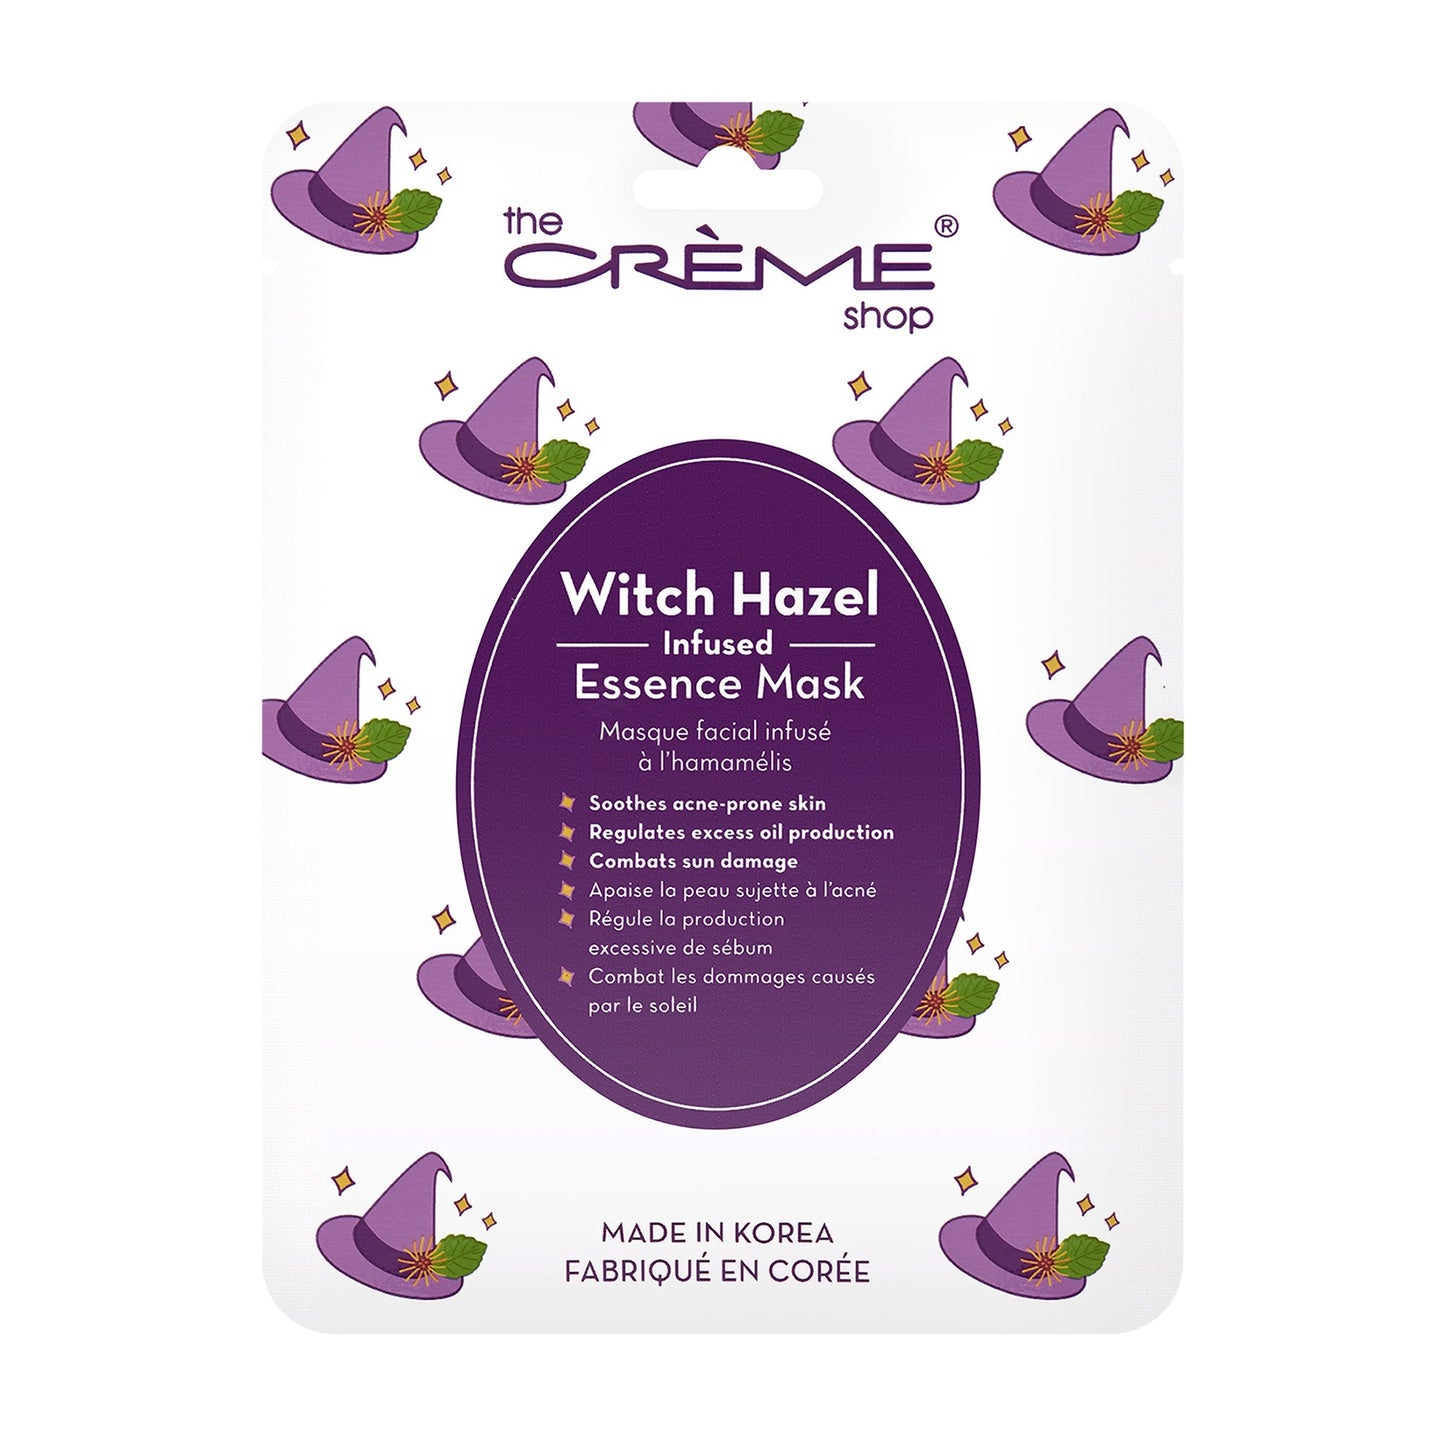 Witch Hazel Infused Face Mask - The Crème Shop